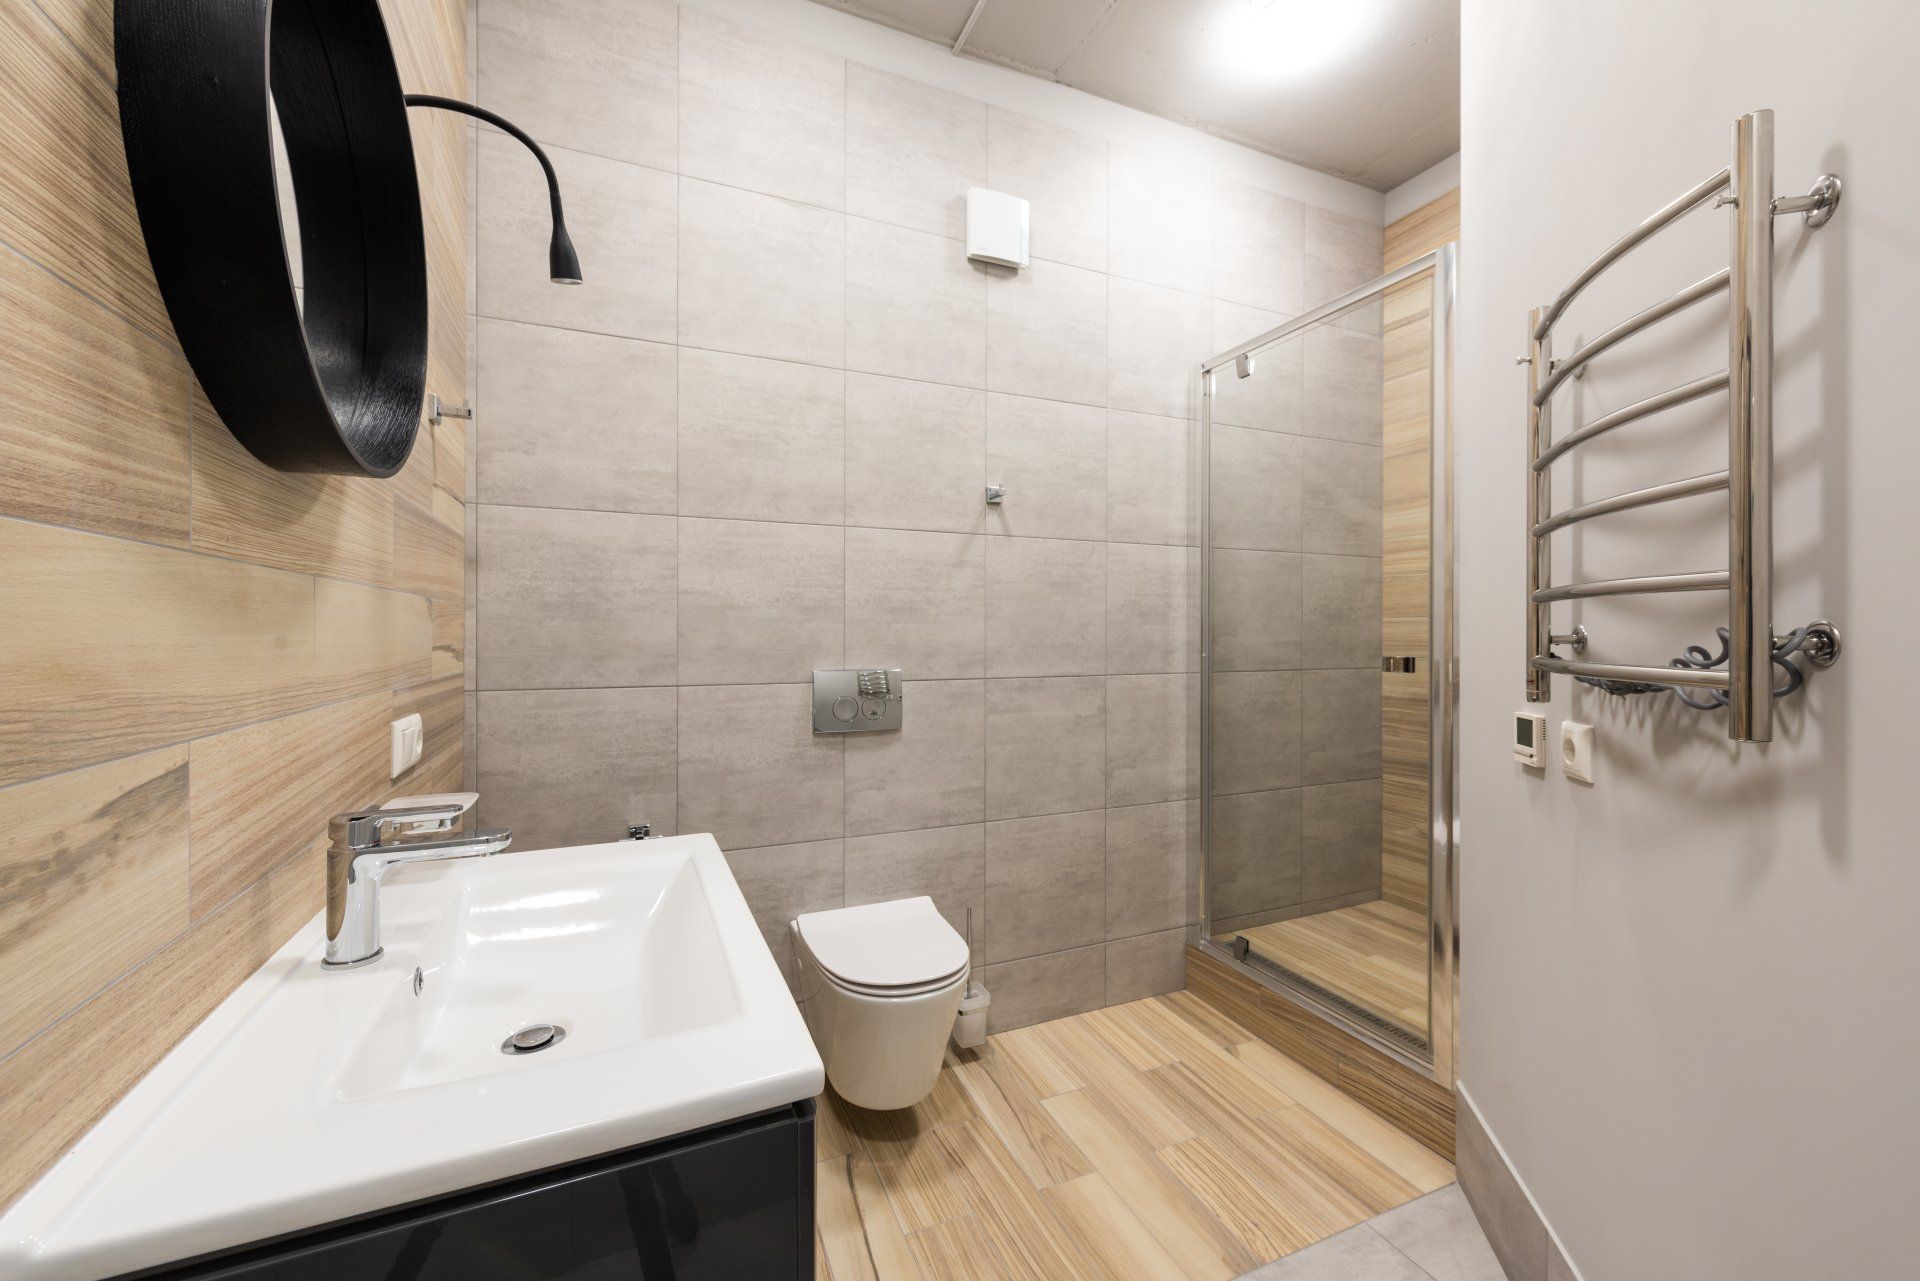 A modern industrial themed bathroom with a tan tile accent wall.